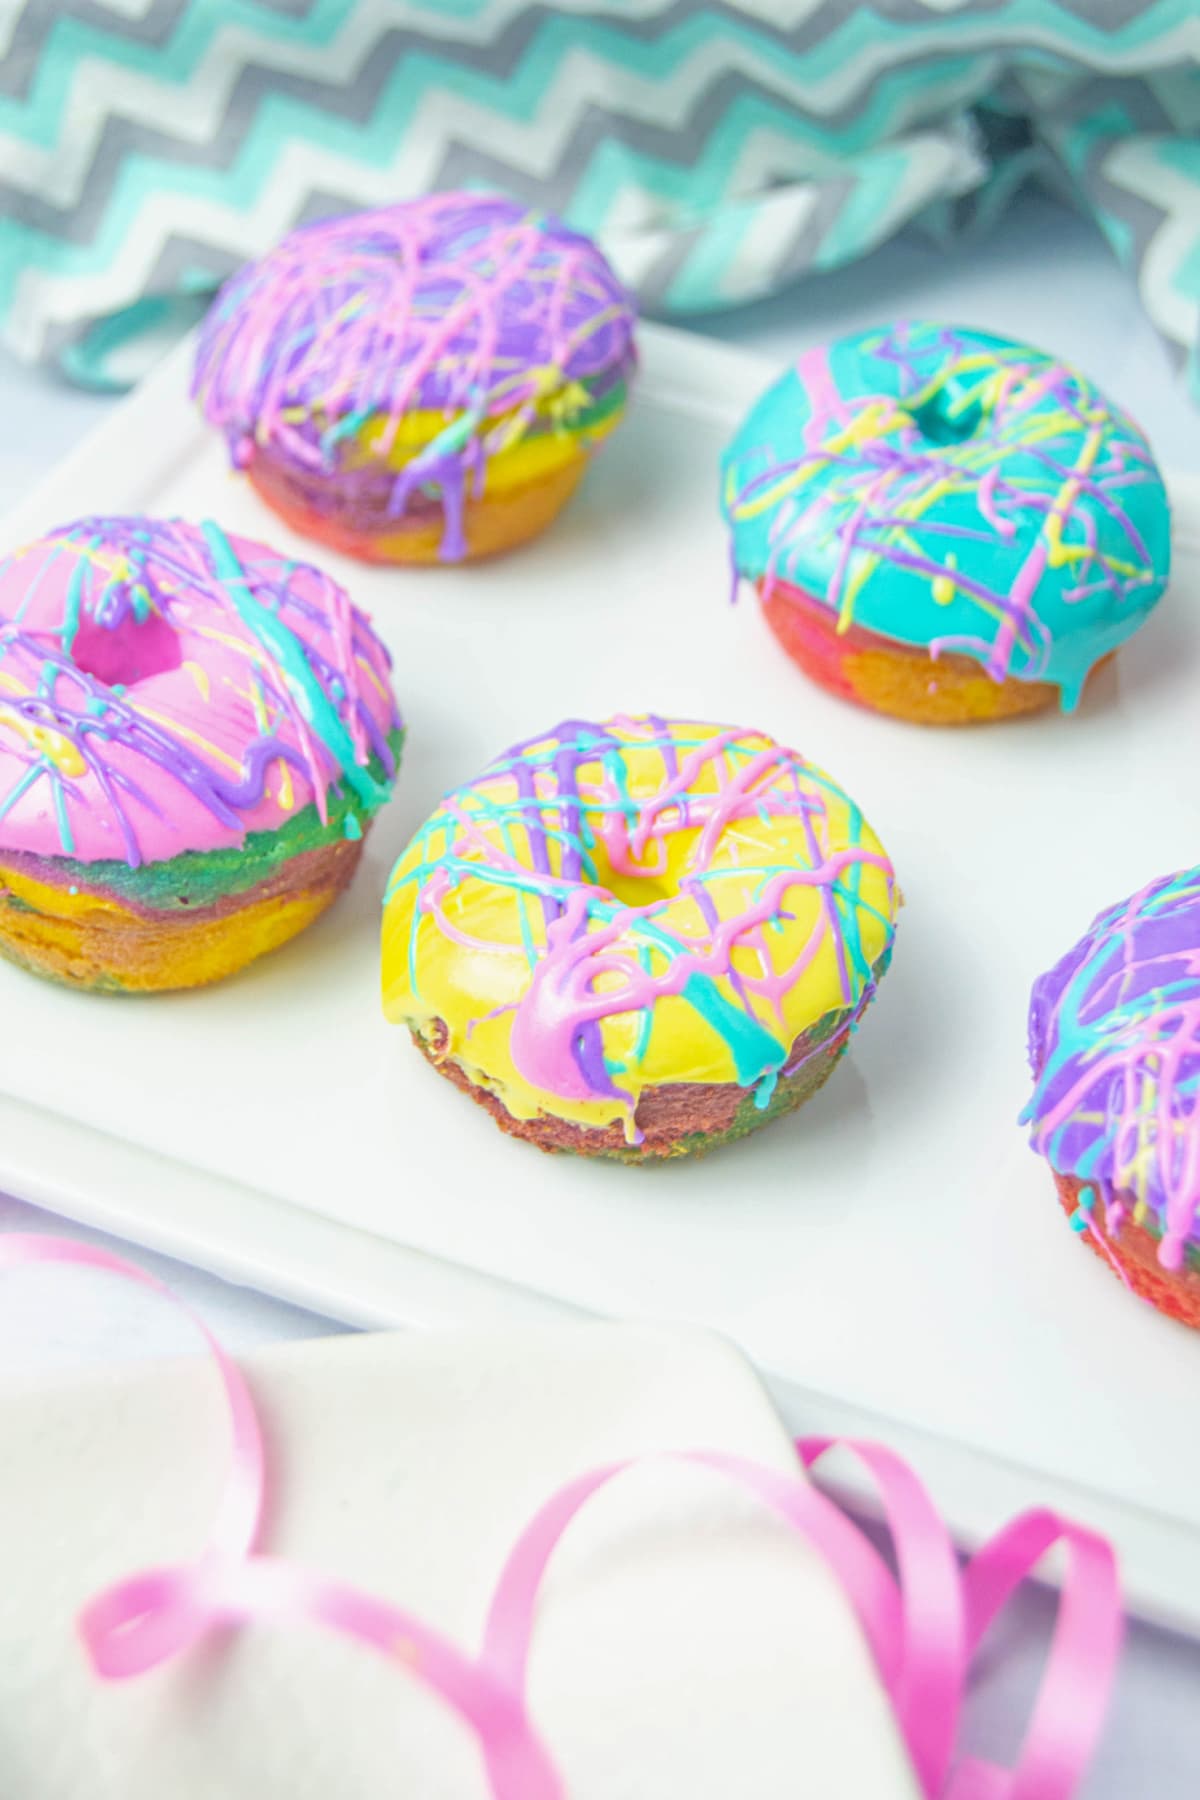 Rainbow donuts with blue and gray chevron style towel